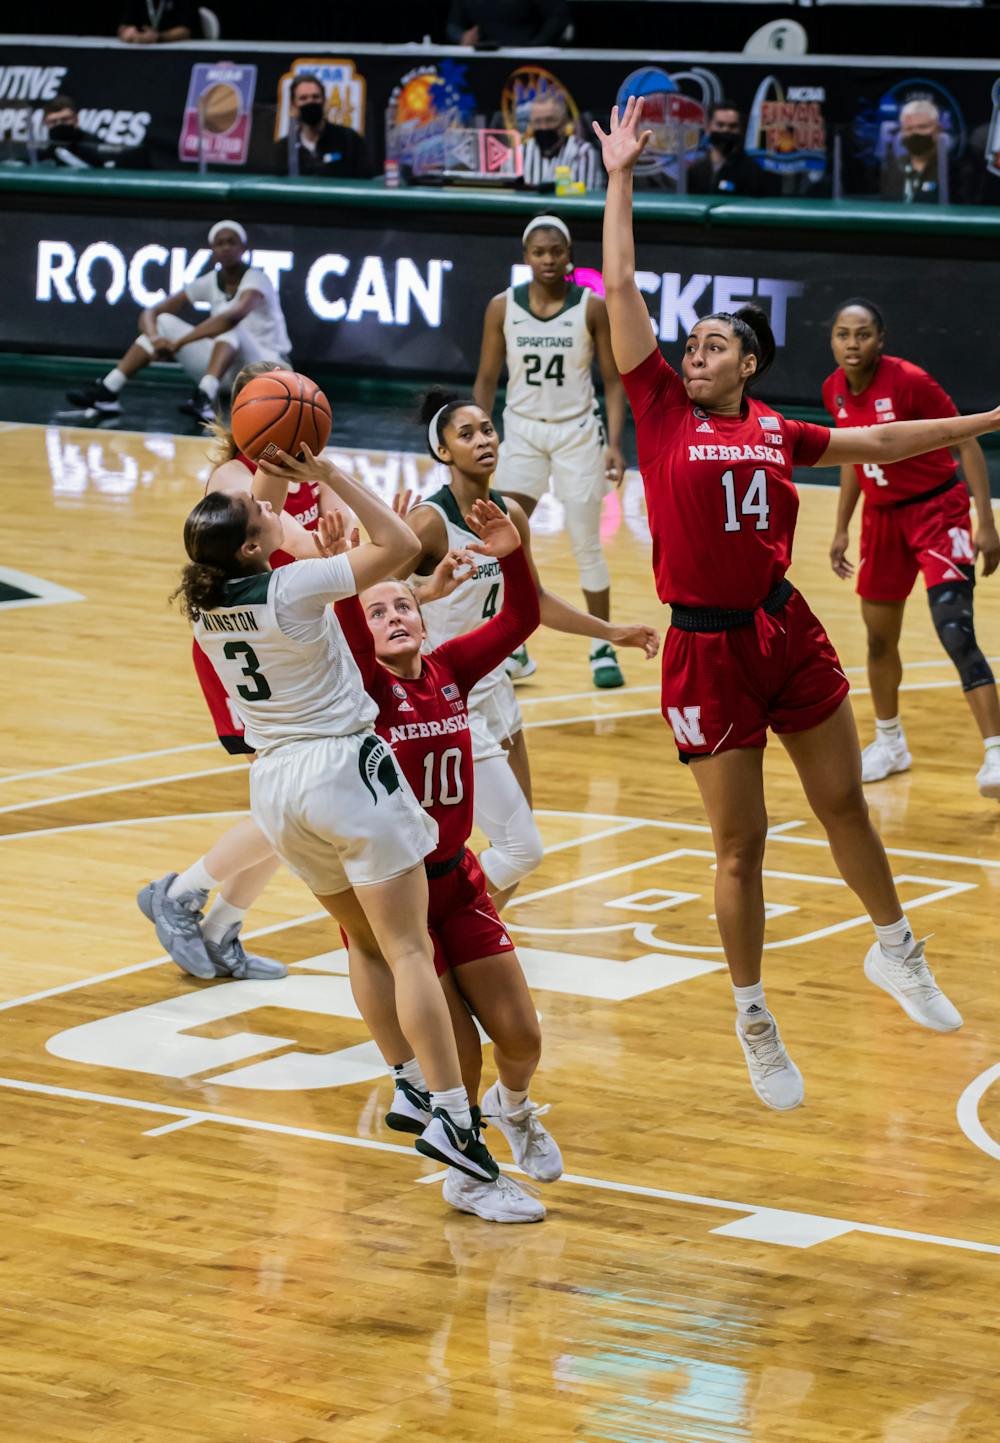 Sophomore guard Alyza Winston shoots a jumper during the Spartans' 68-64 loss to Nebraska on Jan. 10, 2021.